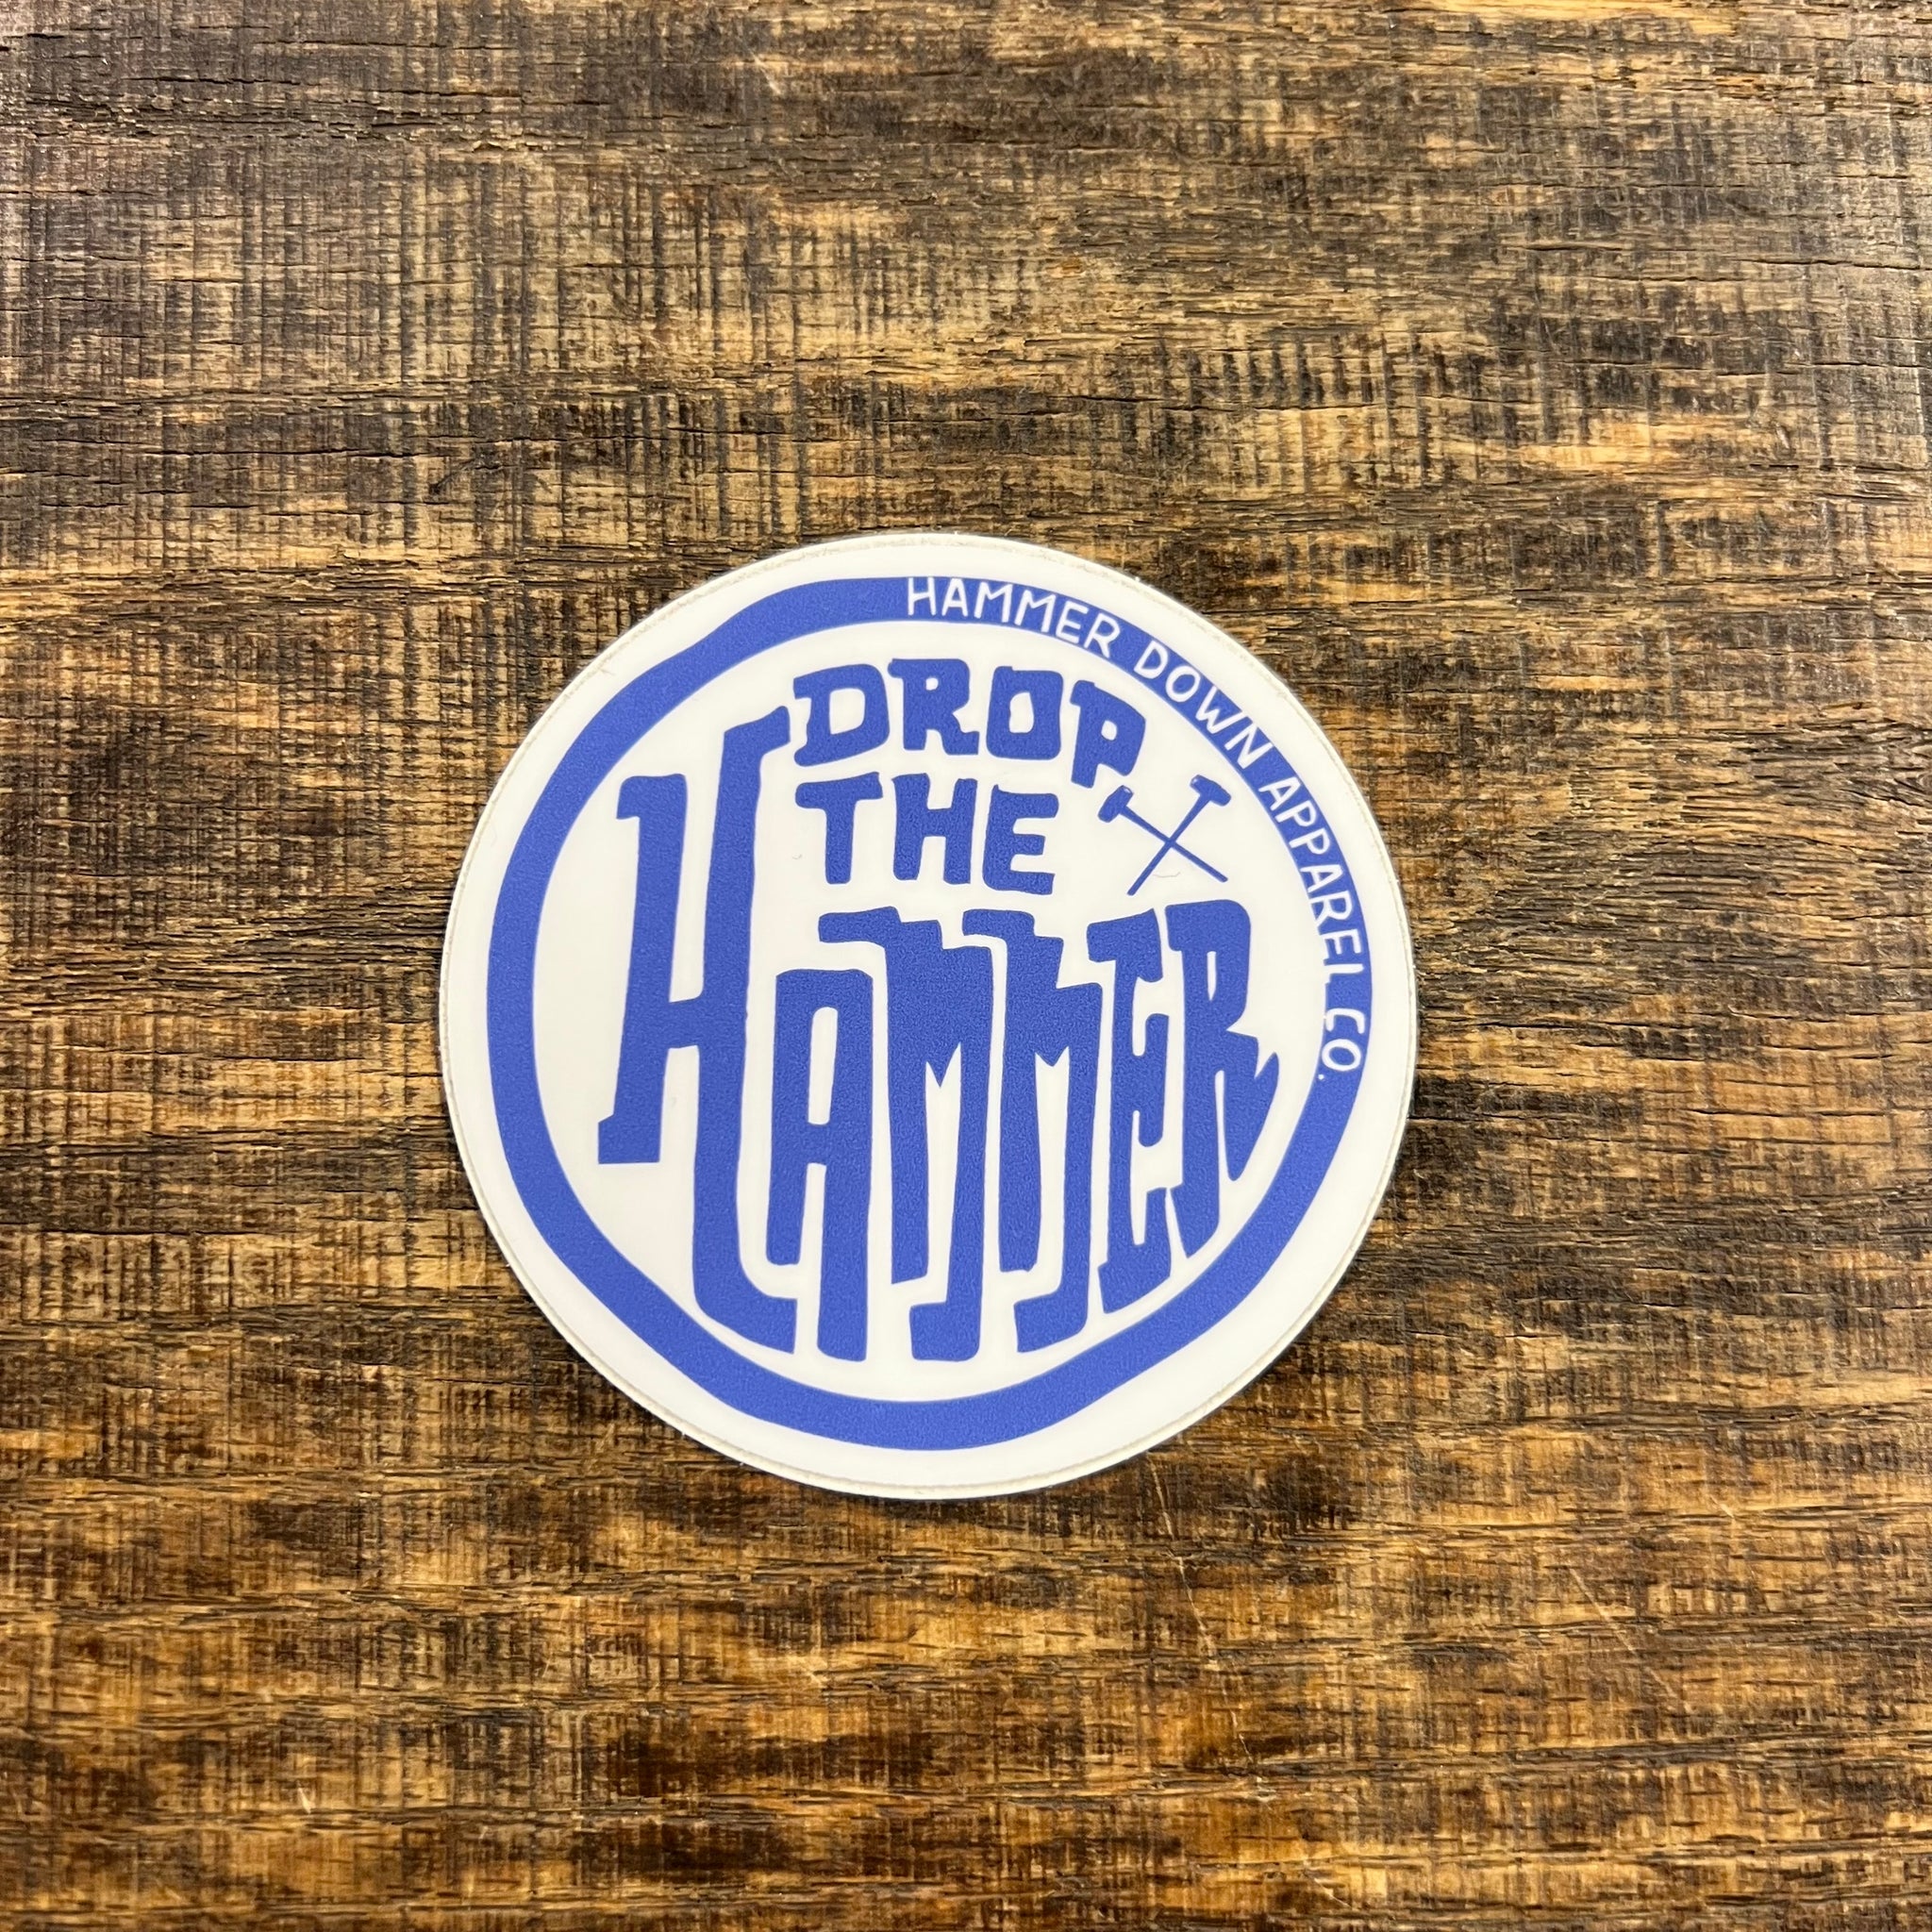 Hammer Down "Drop The Hammer Stamp" Sticker - White And Blue